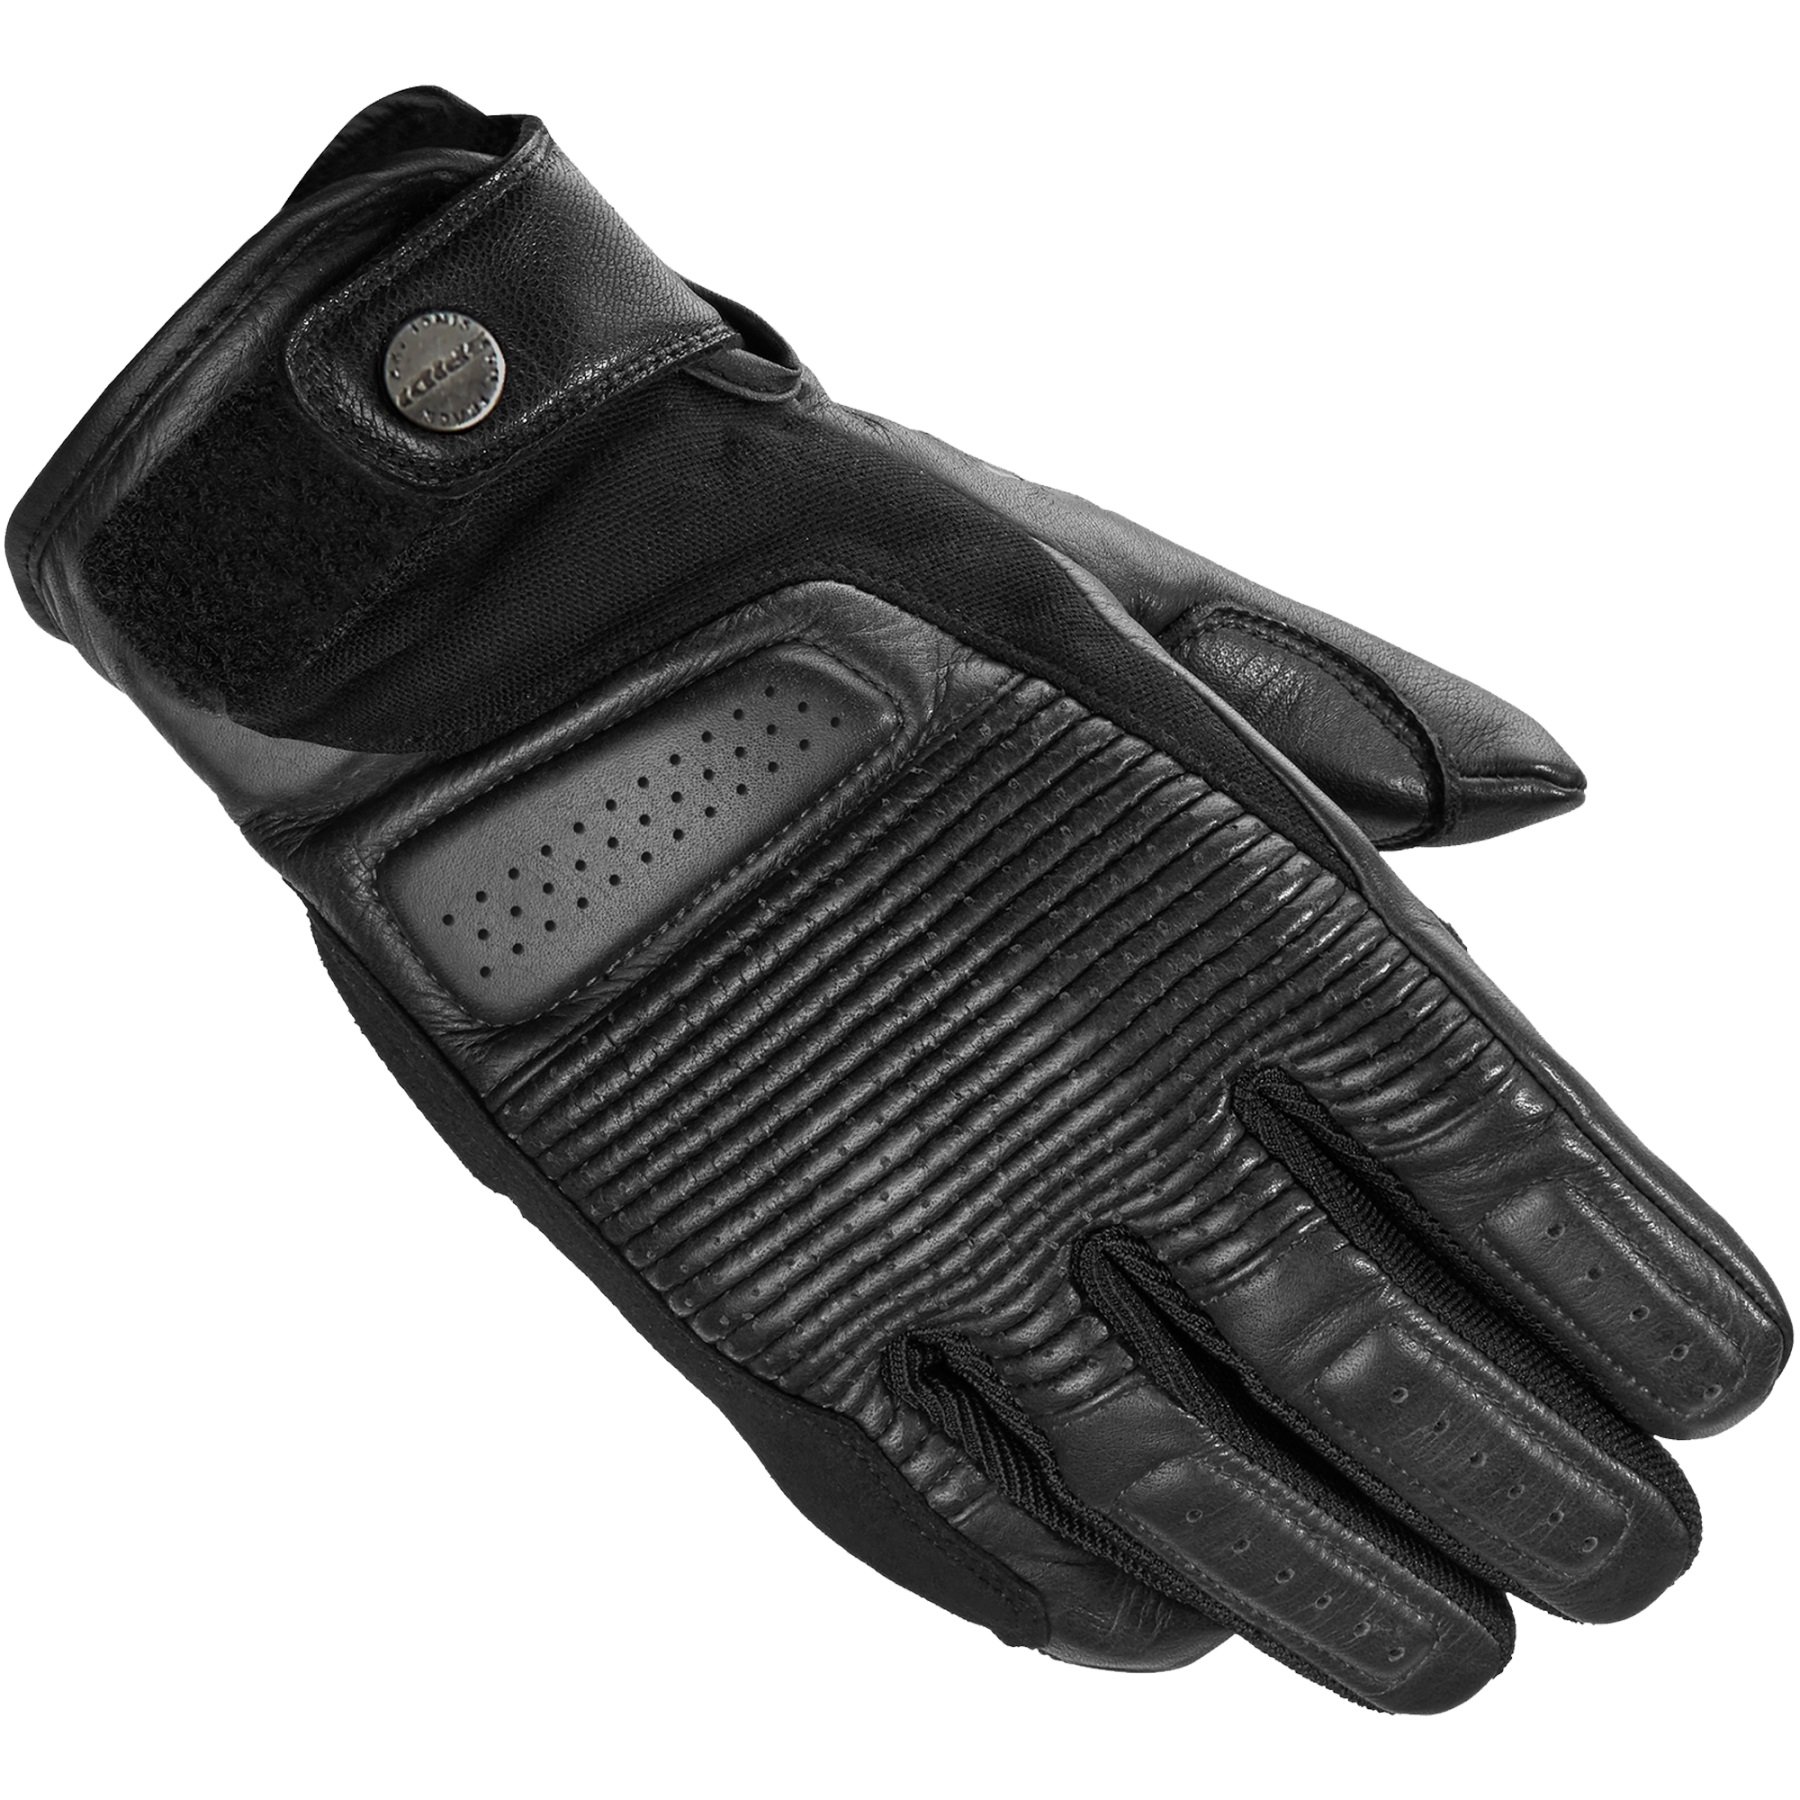 Image of Spidi Clubber Black Motorcycle Gloves Talla 3XL